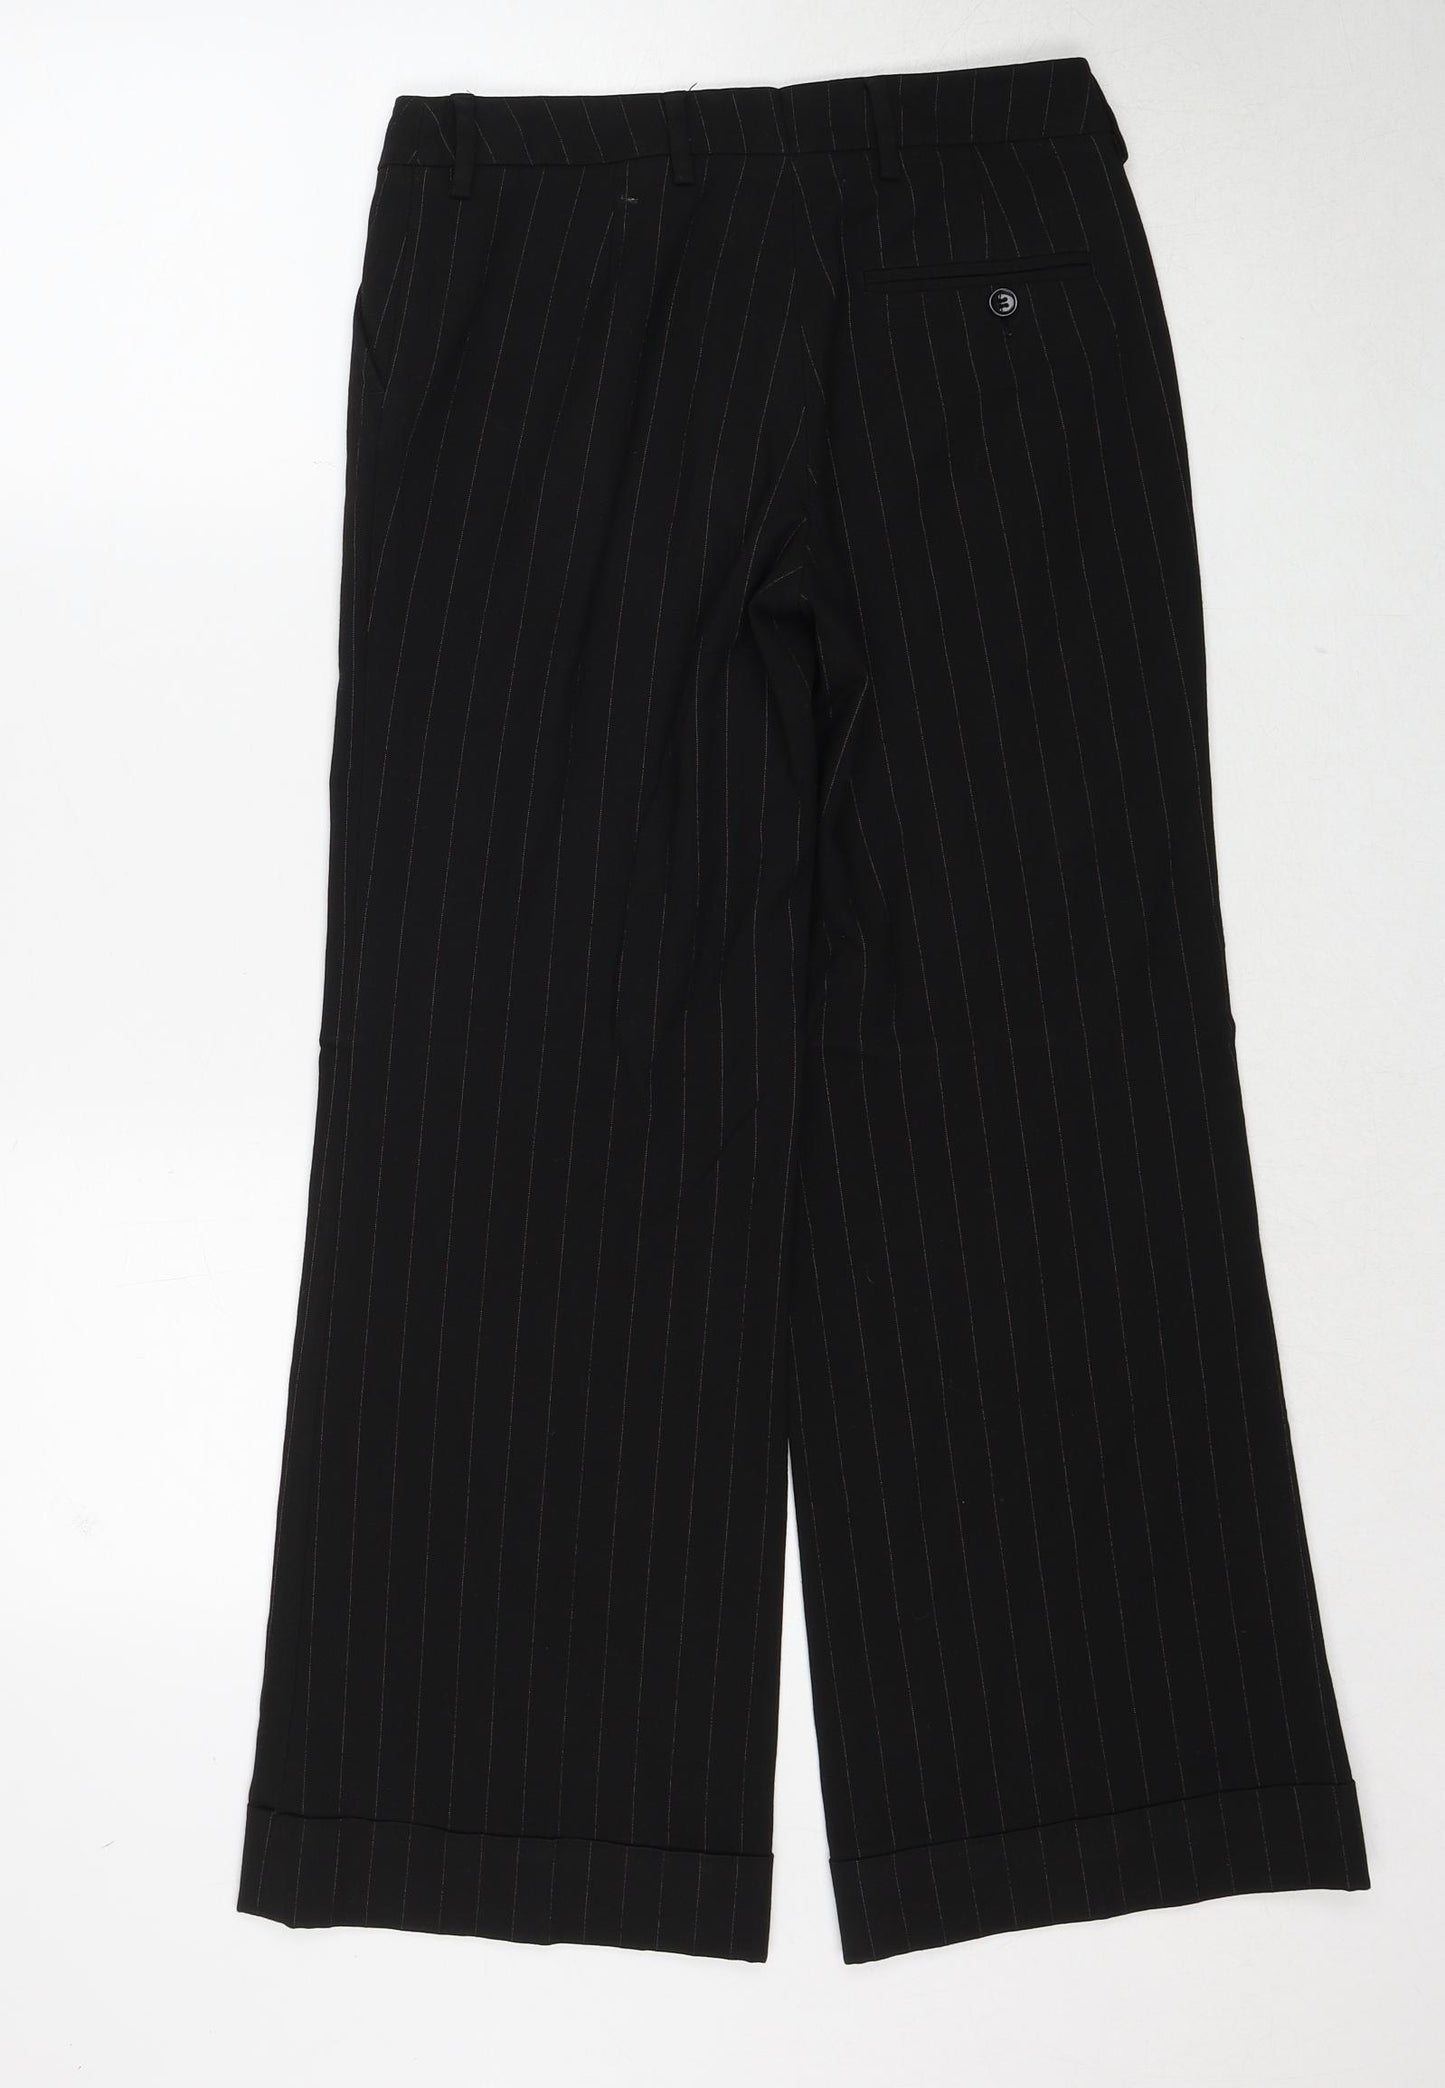 H&M Womens Black Striped Polyester Trousers Size 10 Regular Zip